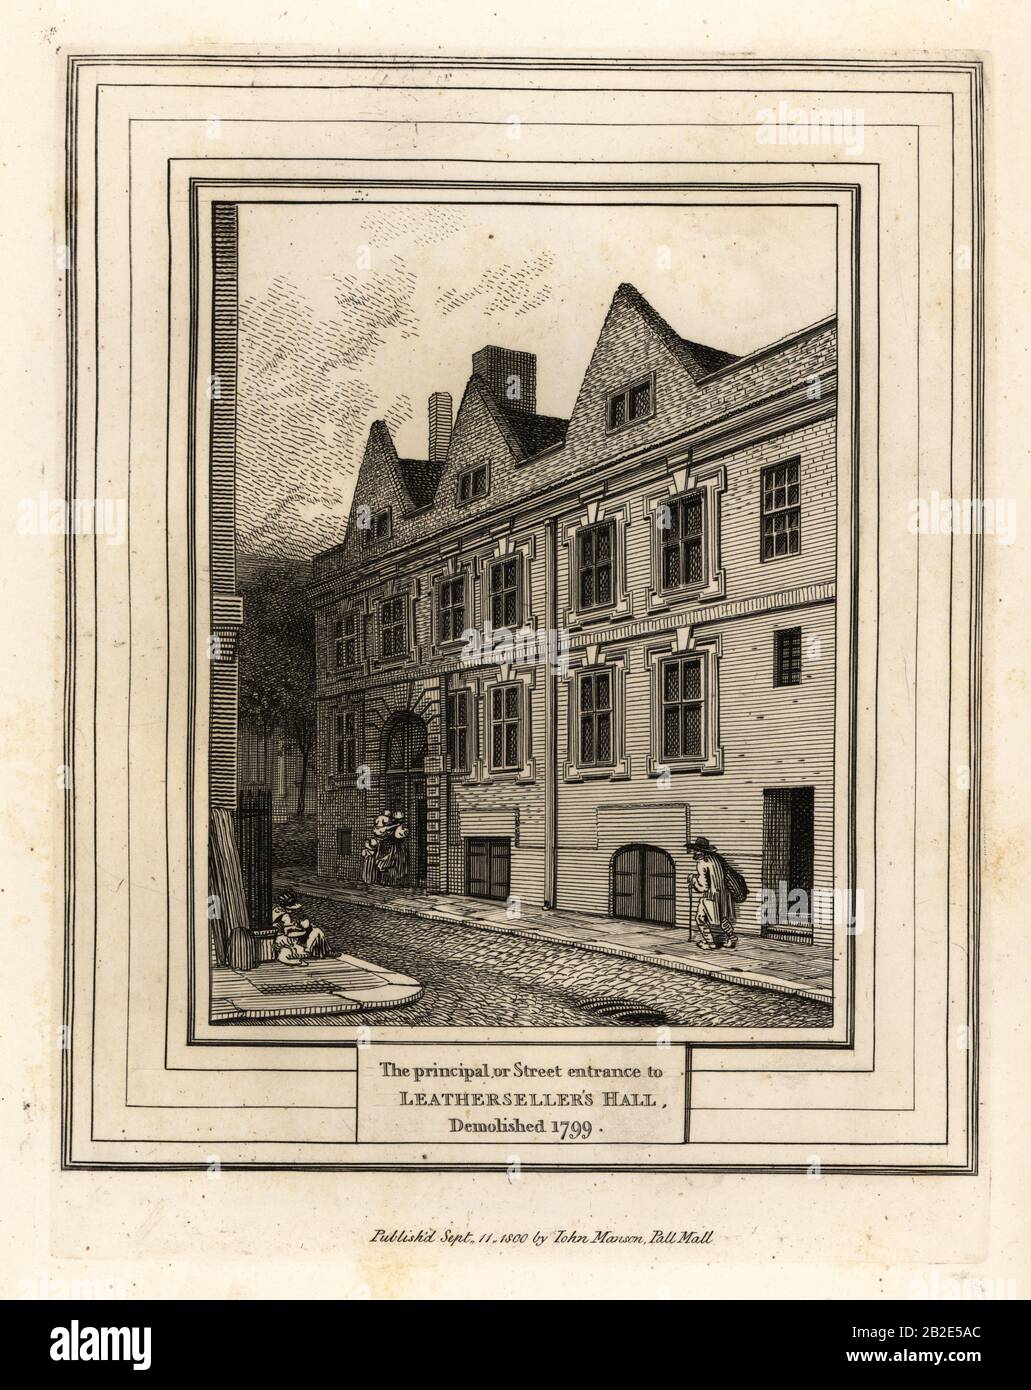 The principal or street entrance to Leathersellers Hall, demolished 1799. Copperplate engraving by John Thomas Smith after original drawings by members of the Society of Antiquaries from his J.T. Smith’s Antiquities of London and its Environs, J. Sewell, R. Folder, J. Simco, London, 1800. Stock Photo